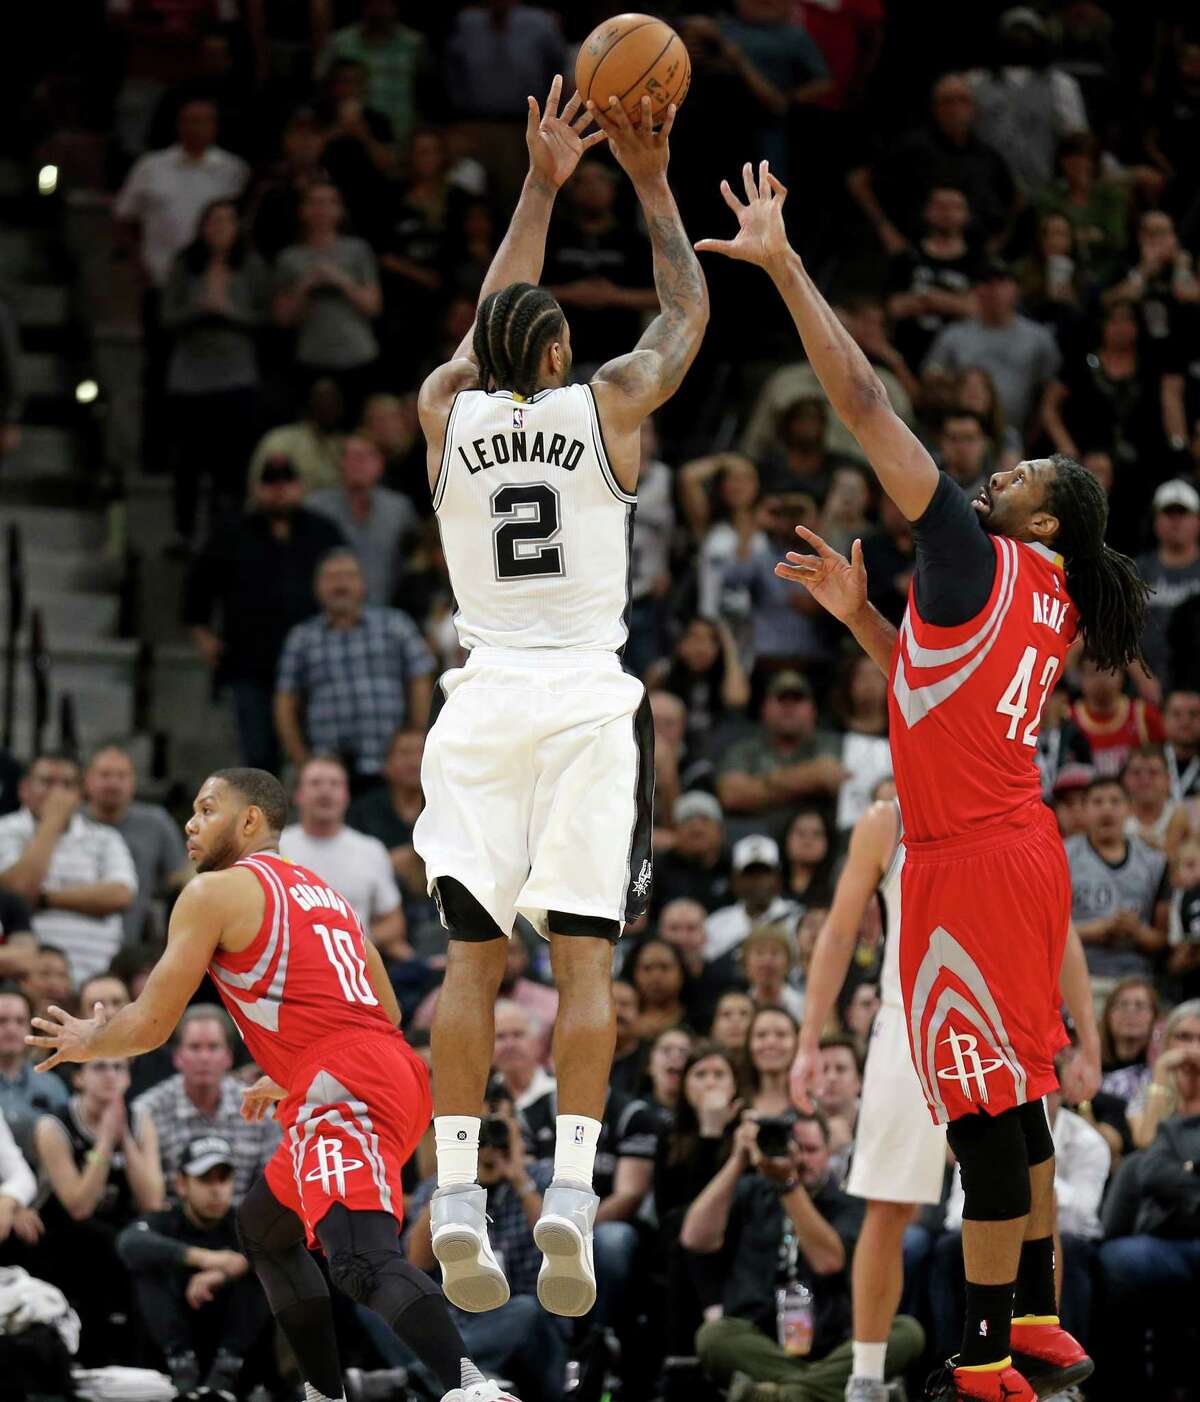 Spurs’ Kawhi Leonard shoots the go-ahead 3-pointer over the Houston Rockets’ Nene on March 6, 2017 at the AT&T Center.